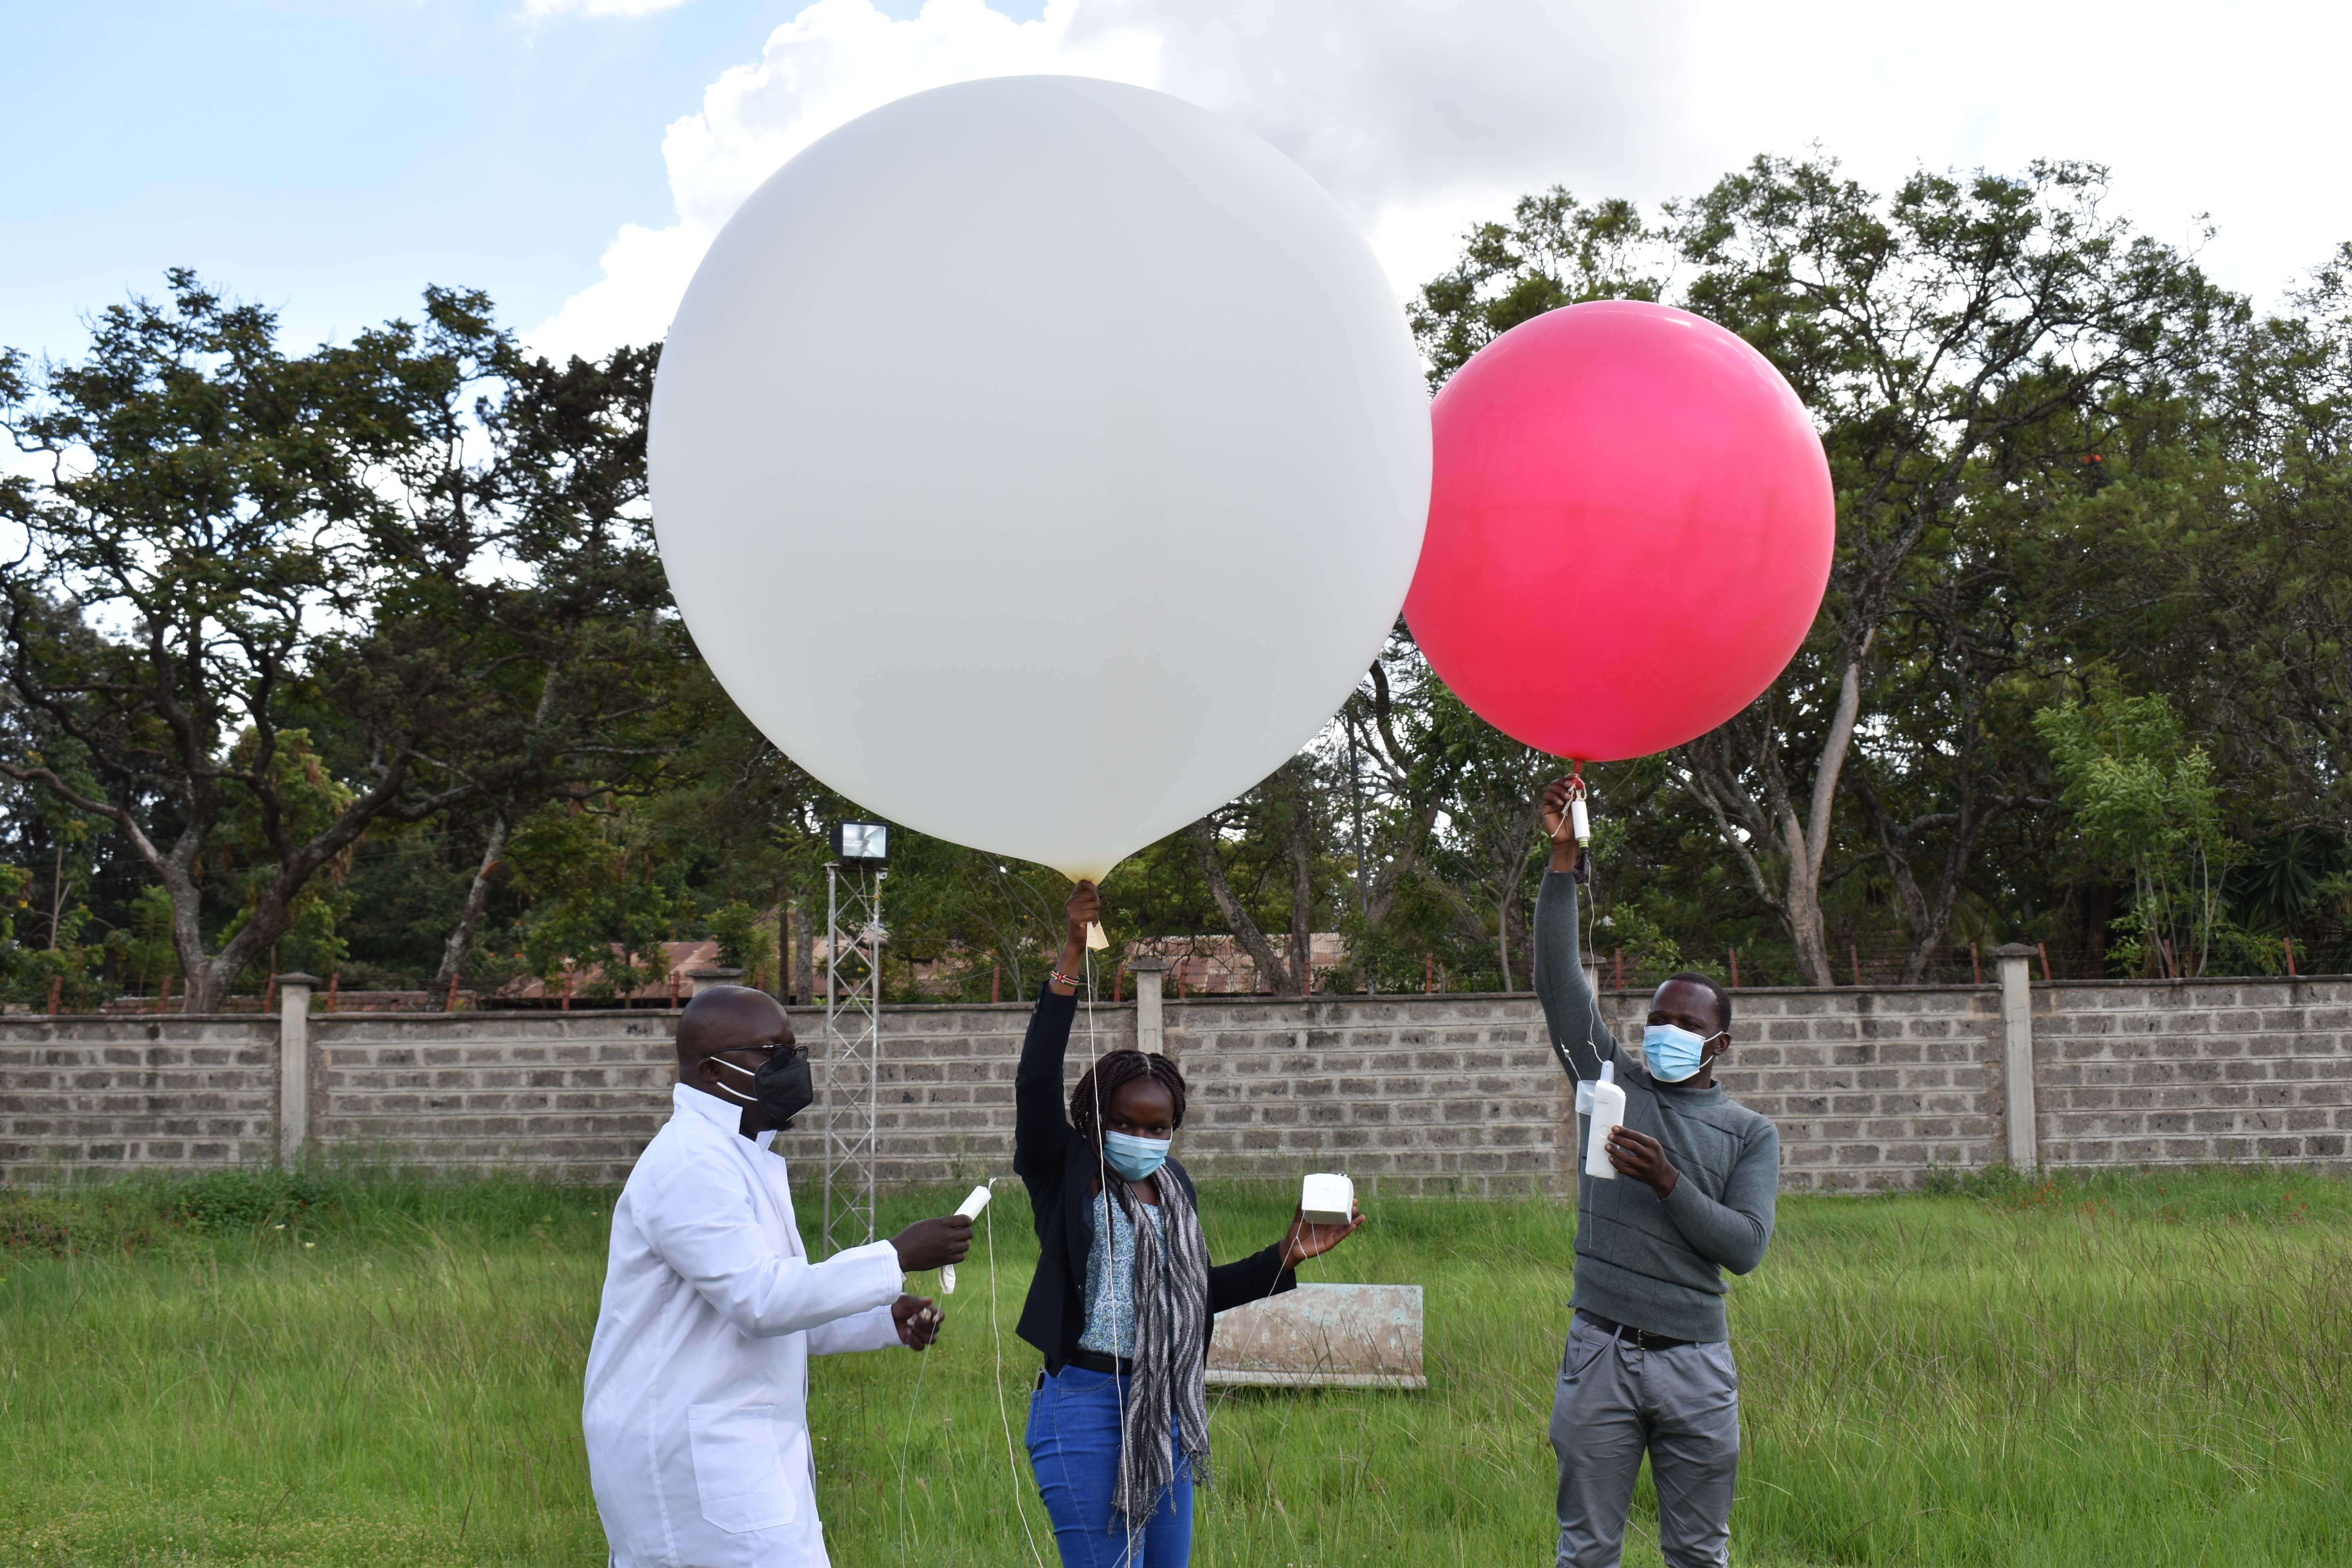 Students from the University of Nairobi and a researcher from Kenya Meteorological Department prepare to launch weather balloons carrying radiosondes to measure wind speed and other atmospheric parameters as part of the RIFTJET campaign. Credit: Callum Munday